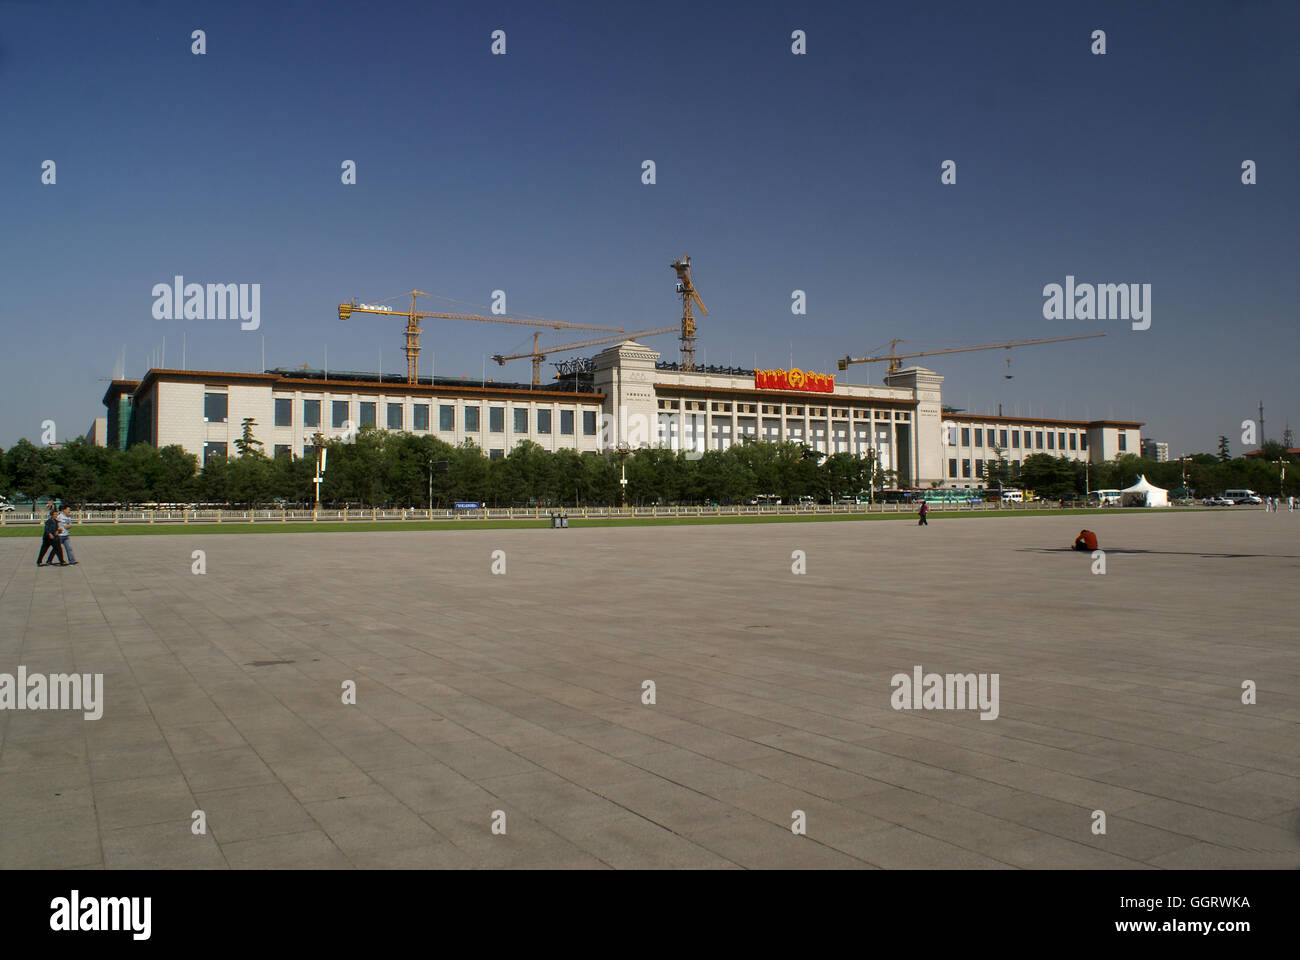 The Great Hall of the People dominates the west side of Tian'anmen Square, Beijing, China. Stock Photo